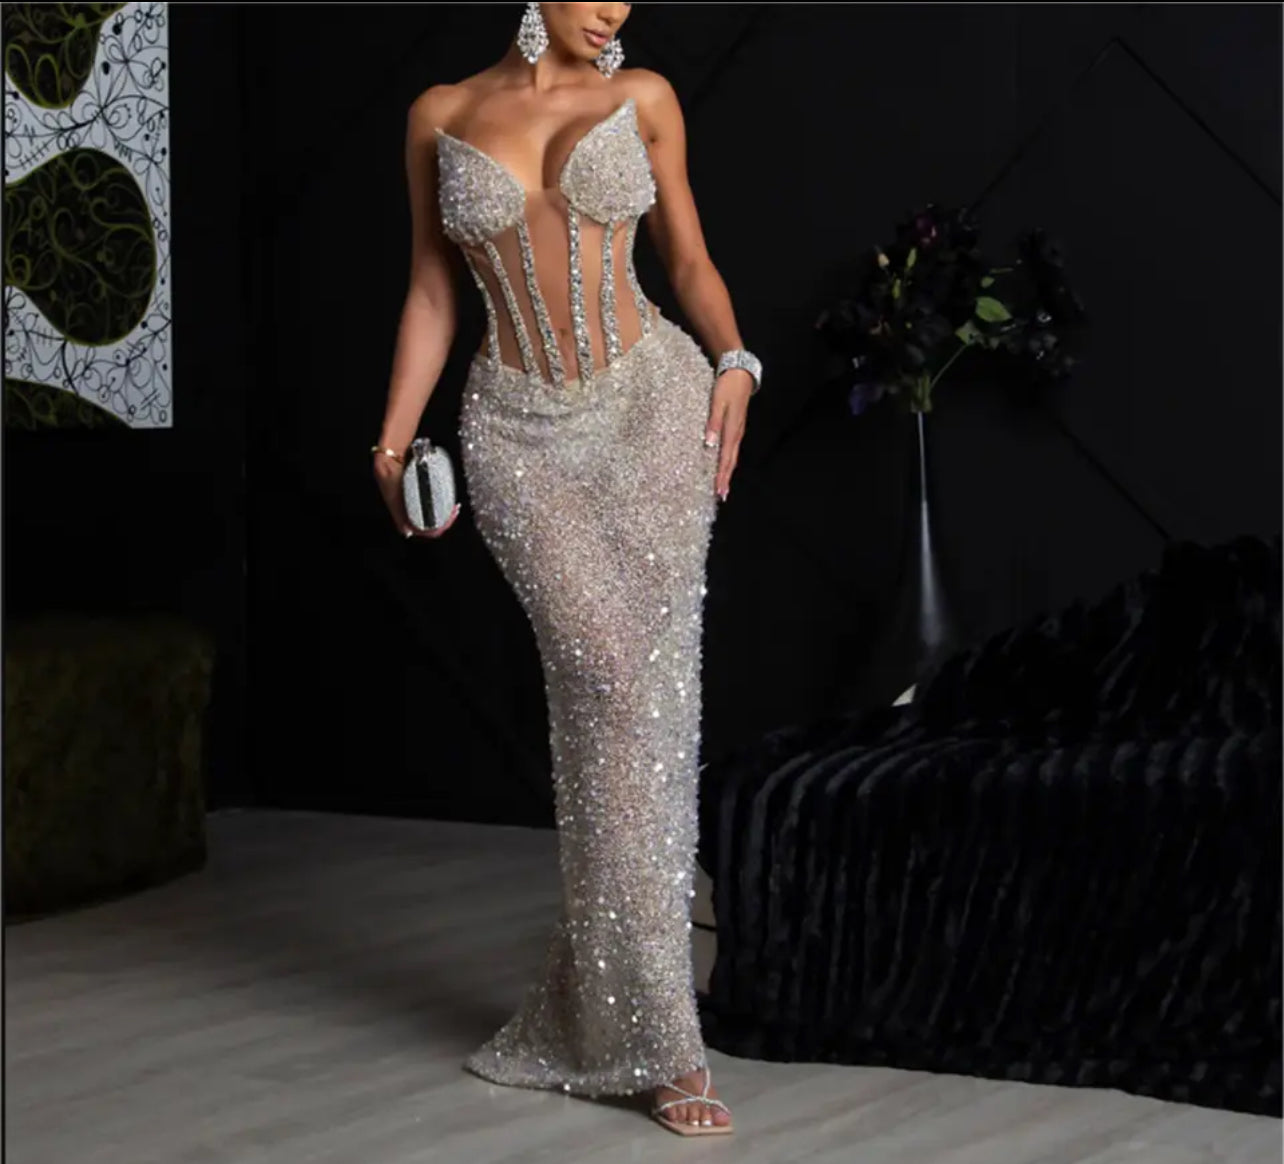 “Luxury” Diamond Ball Dress, Beaded Open Waist Illusion Sheer ( This Item/Purchase is Non-Refundable)